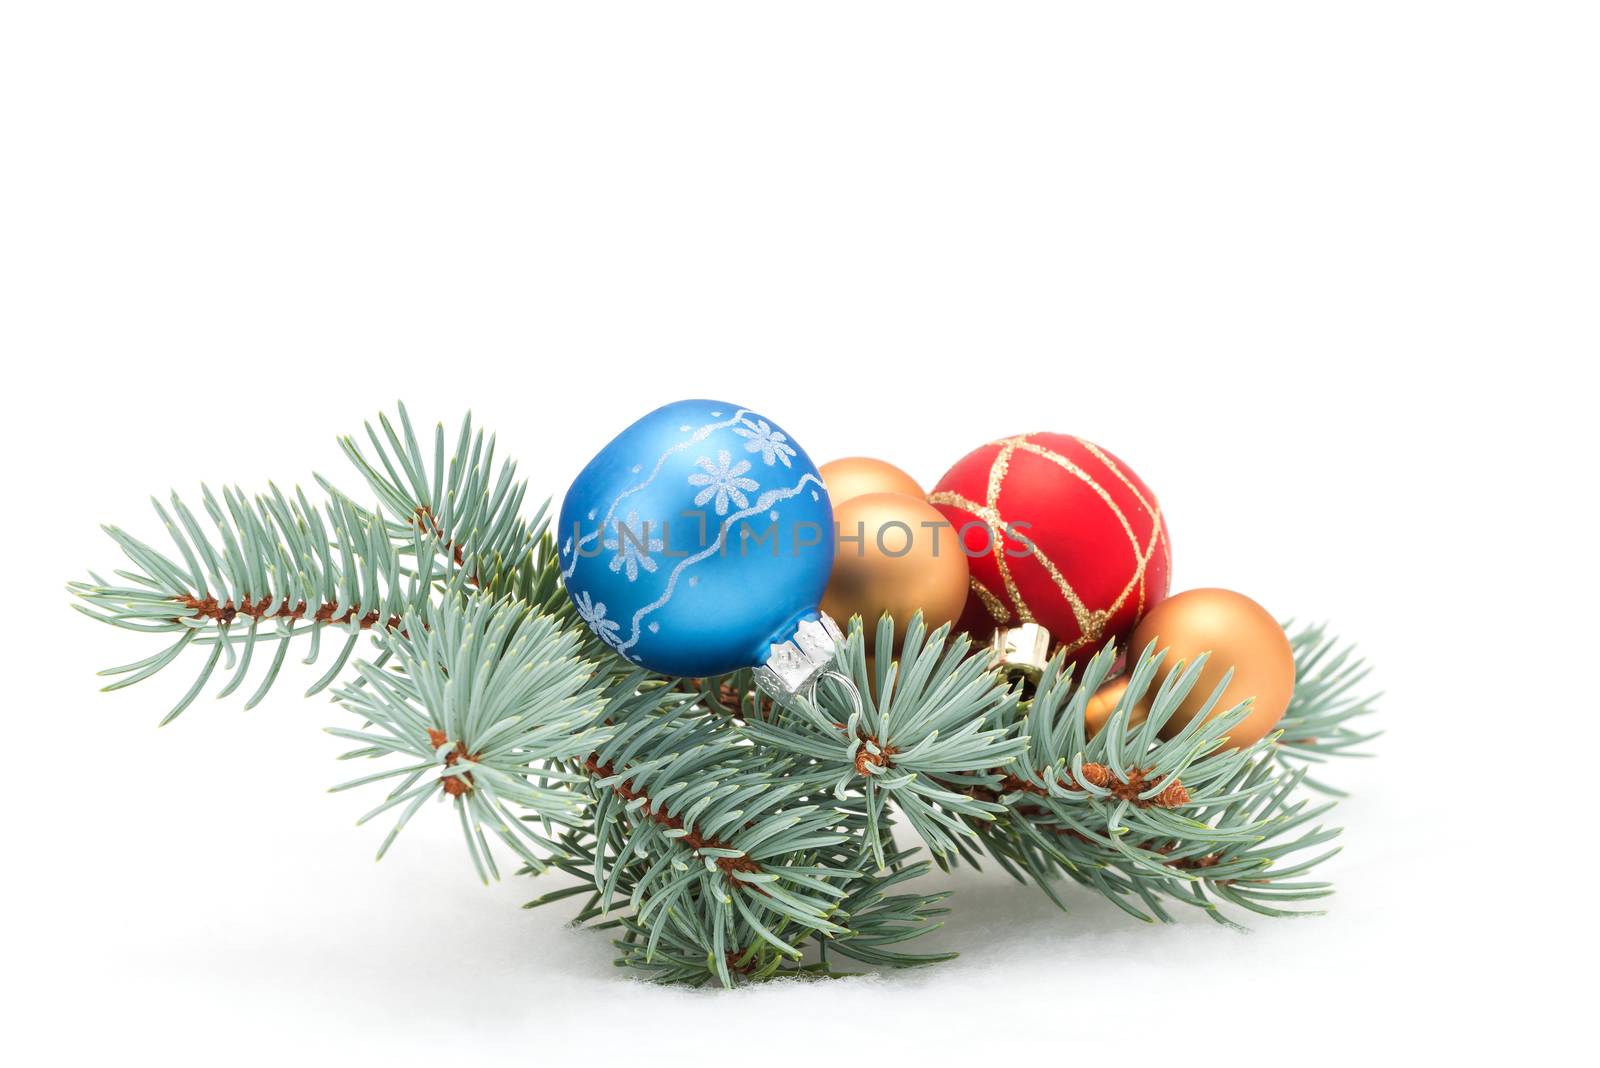 Colorful Christmas Baubles by billberryphotography